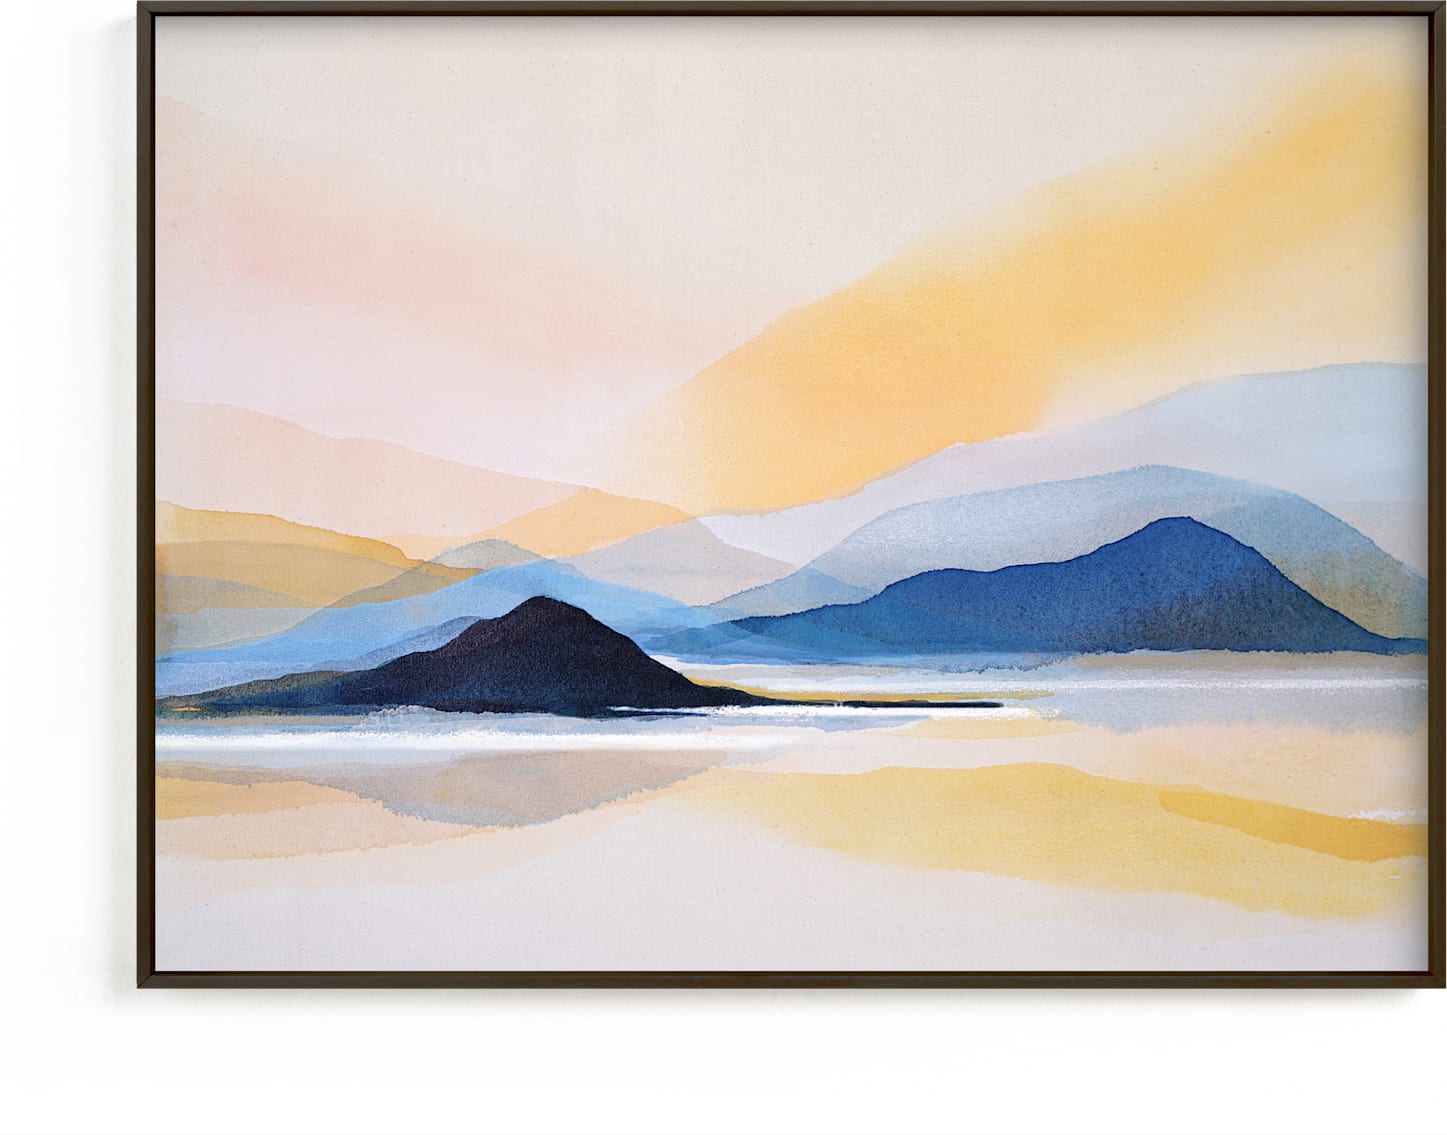 This is a blue, gold art by Shina Choi called Mountain in the calm light.